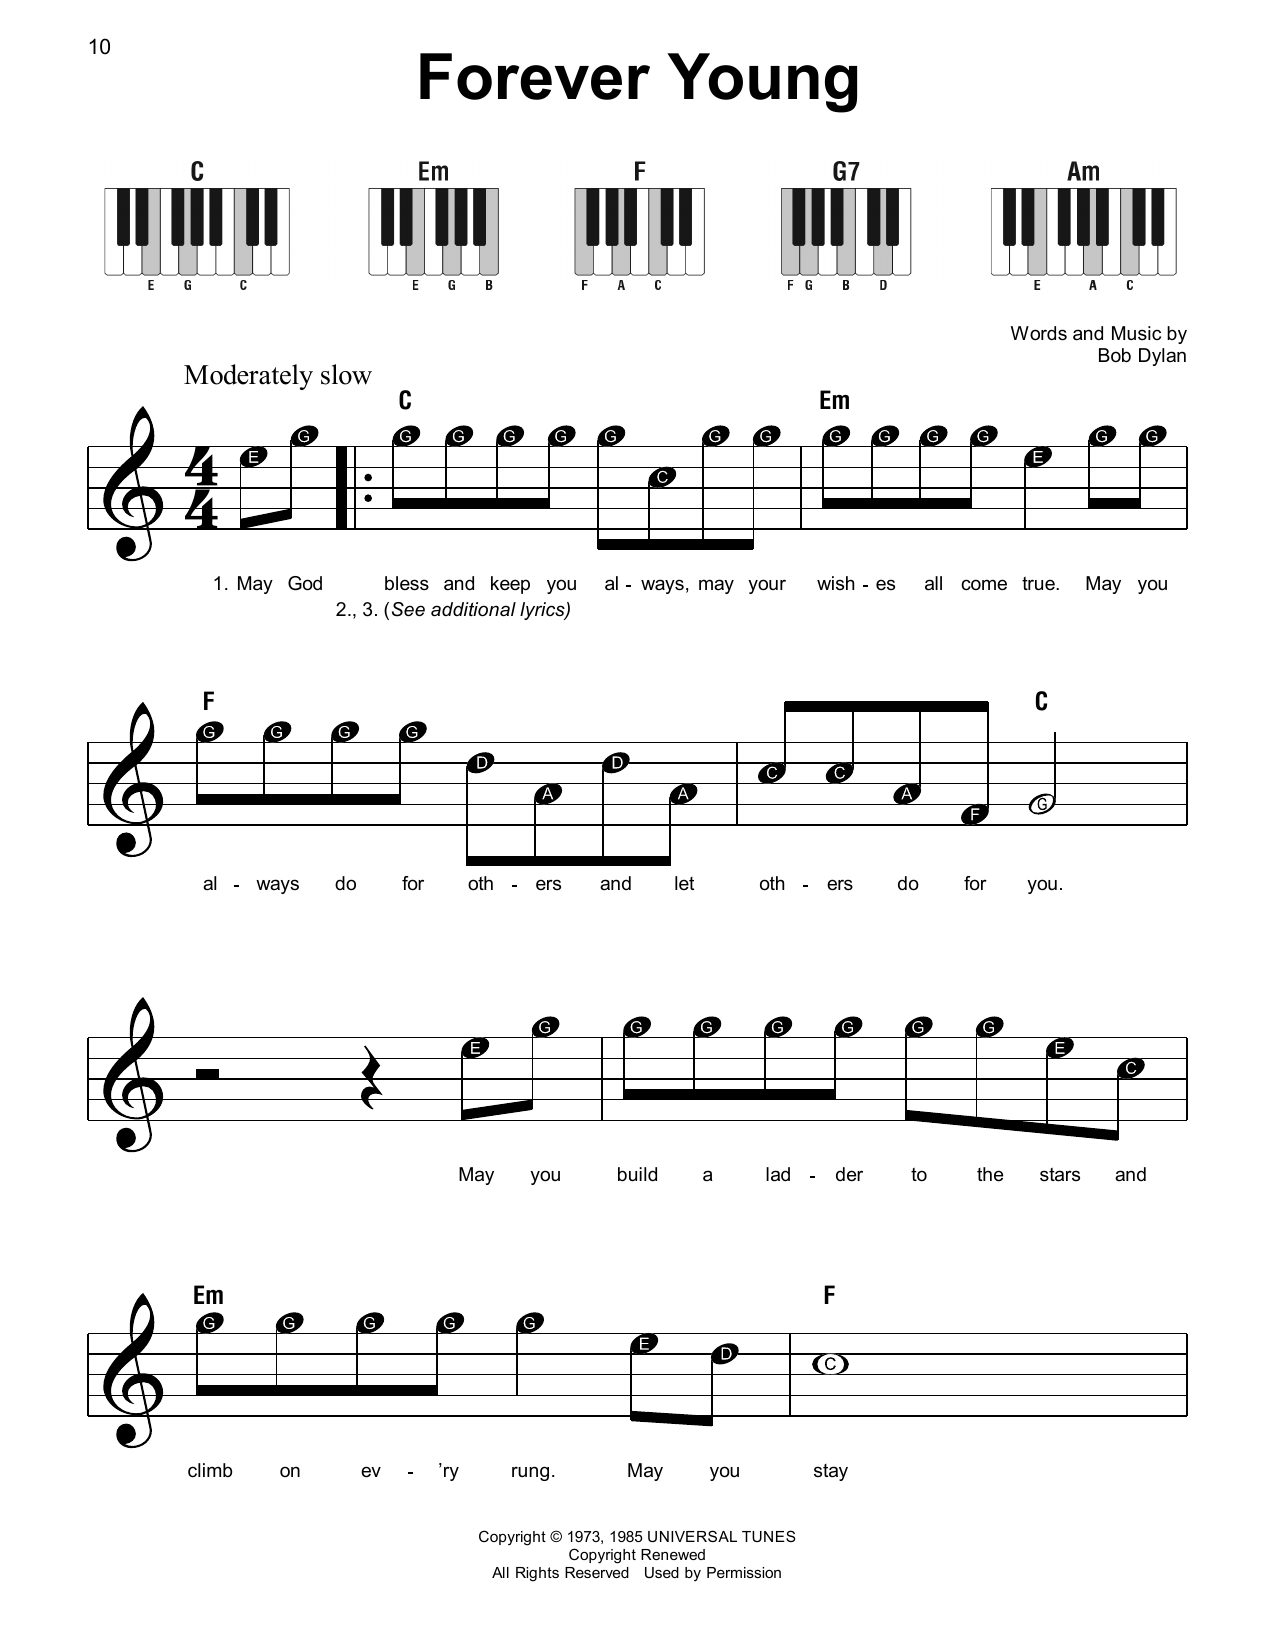 Bob Dylan Forever Young sheet music notes and chords. Download Printable PDF.